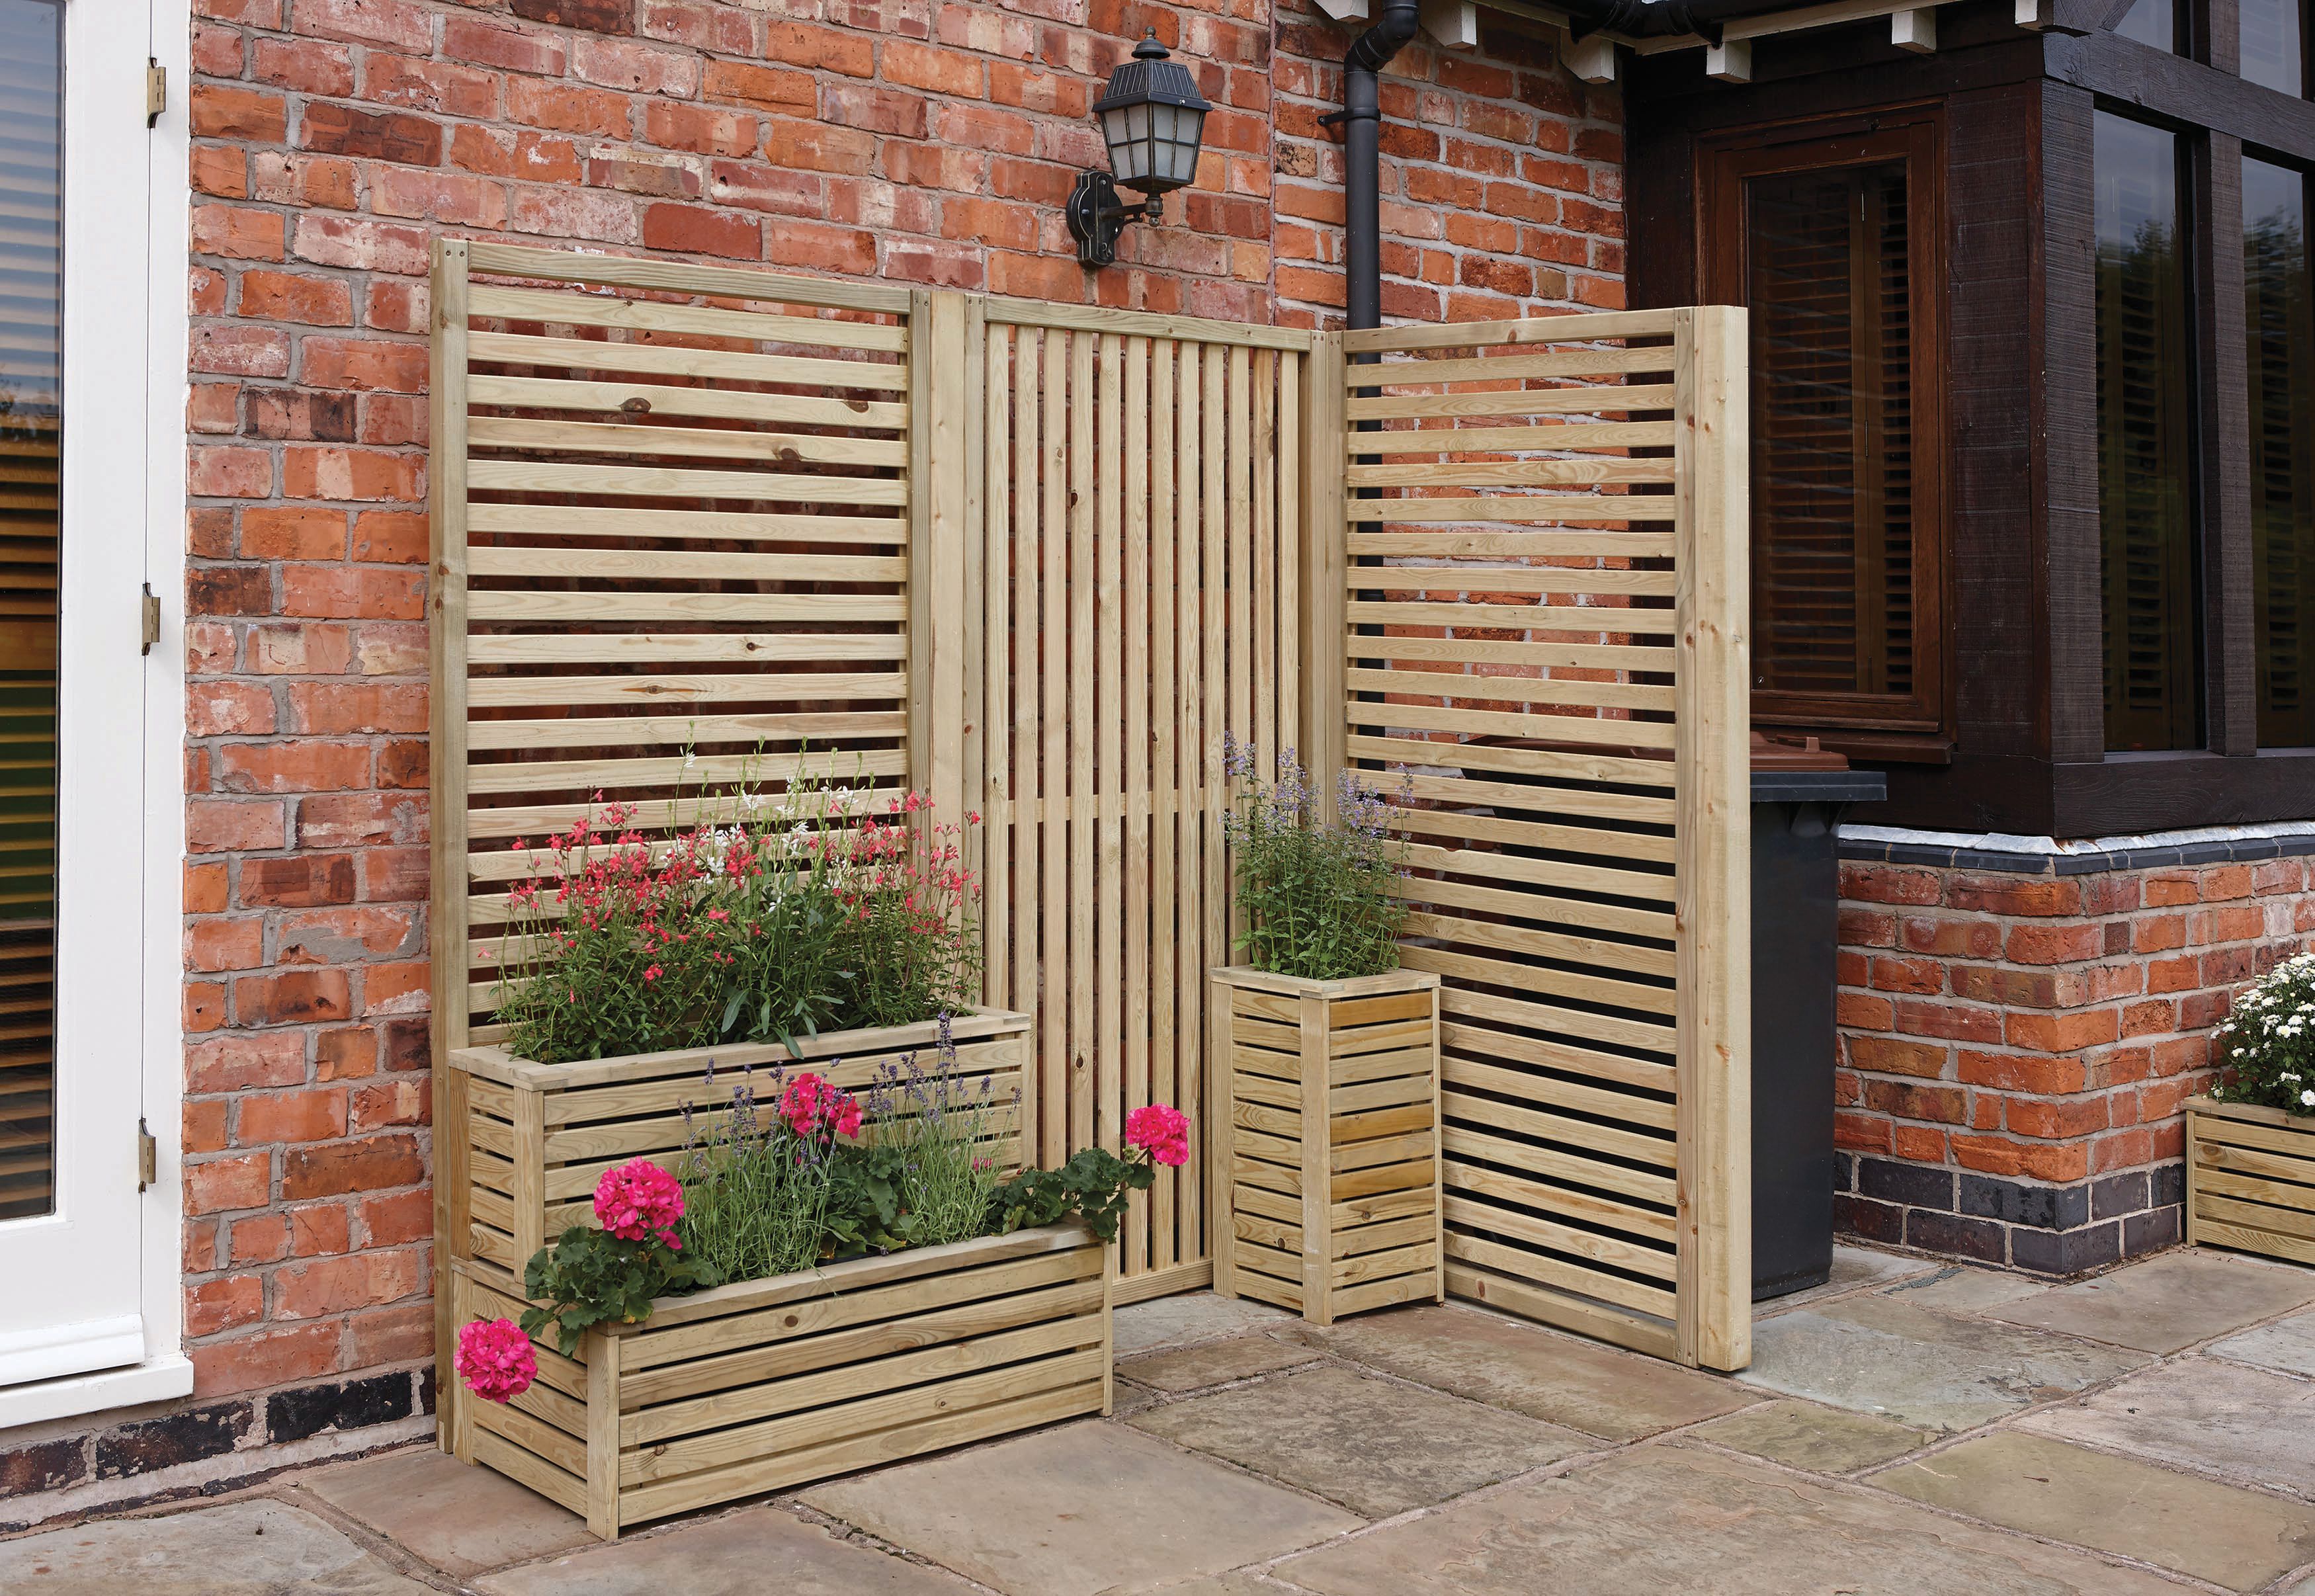 Image of Rowlinson Vertical Timber Slat Screen - Pack of 4